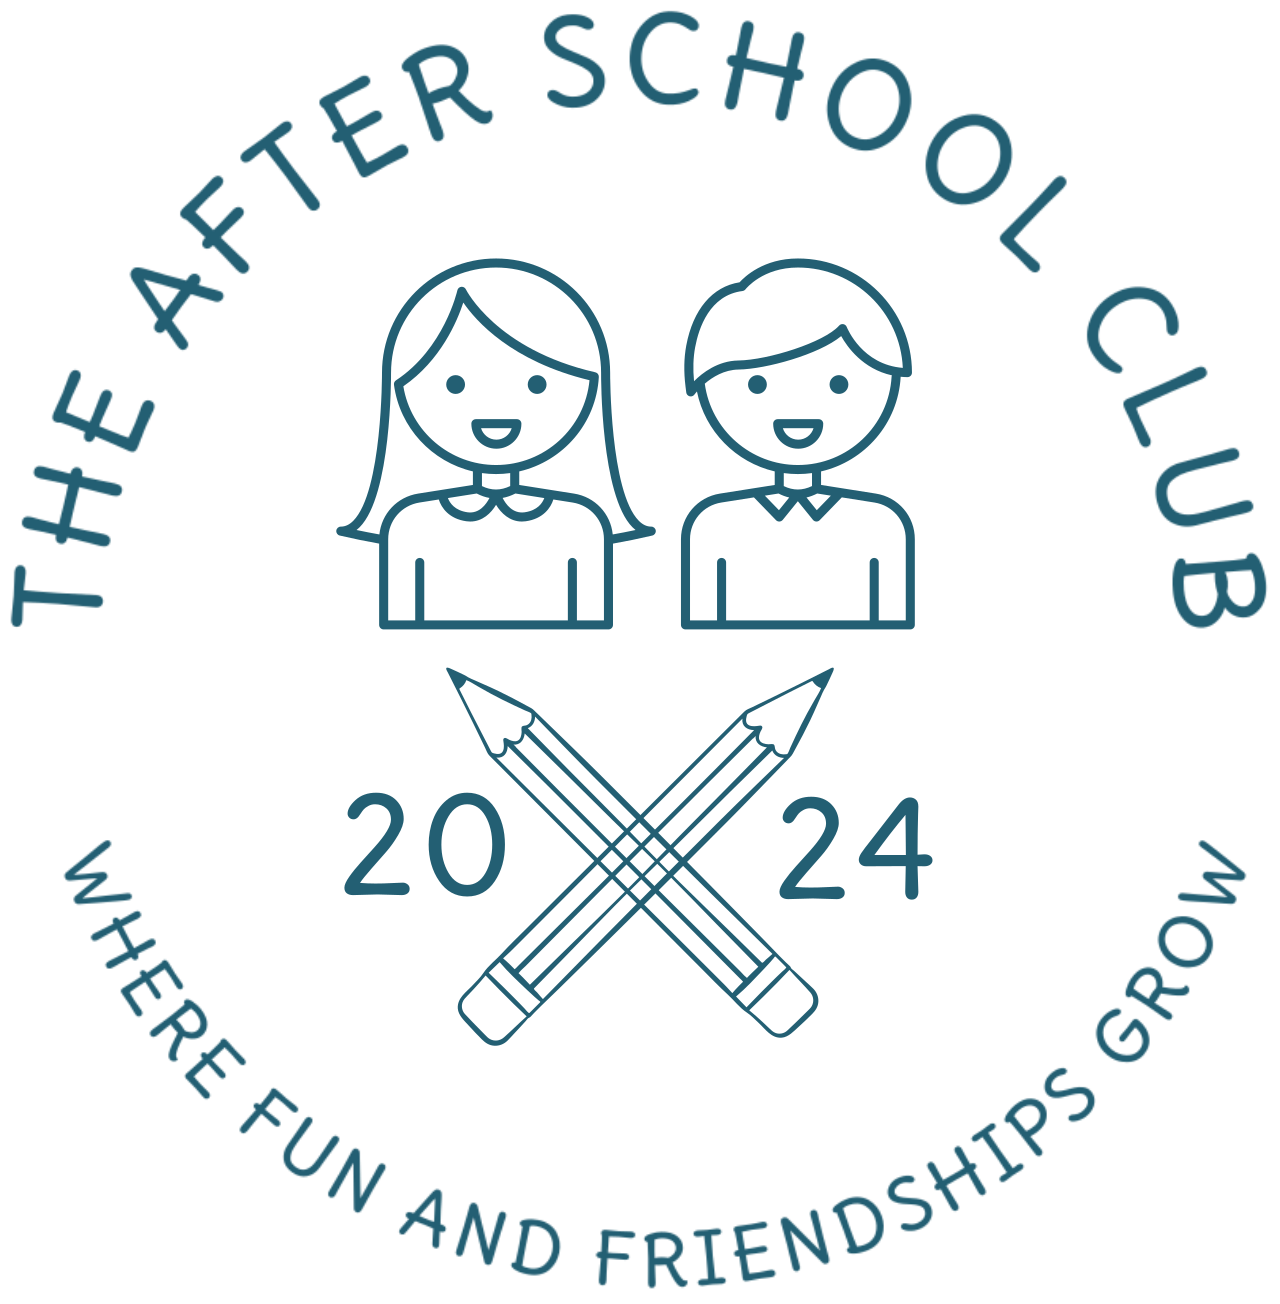 THE AFTER SCHOOL CLUB's logo